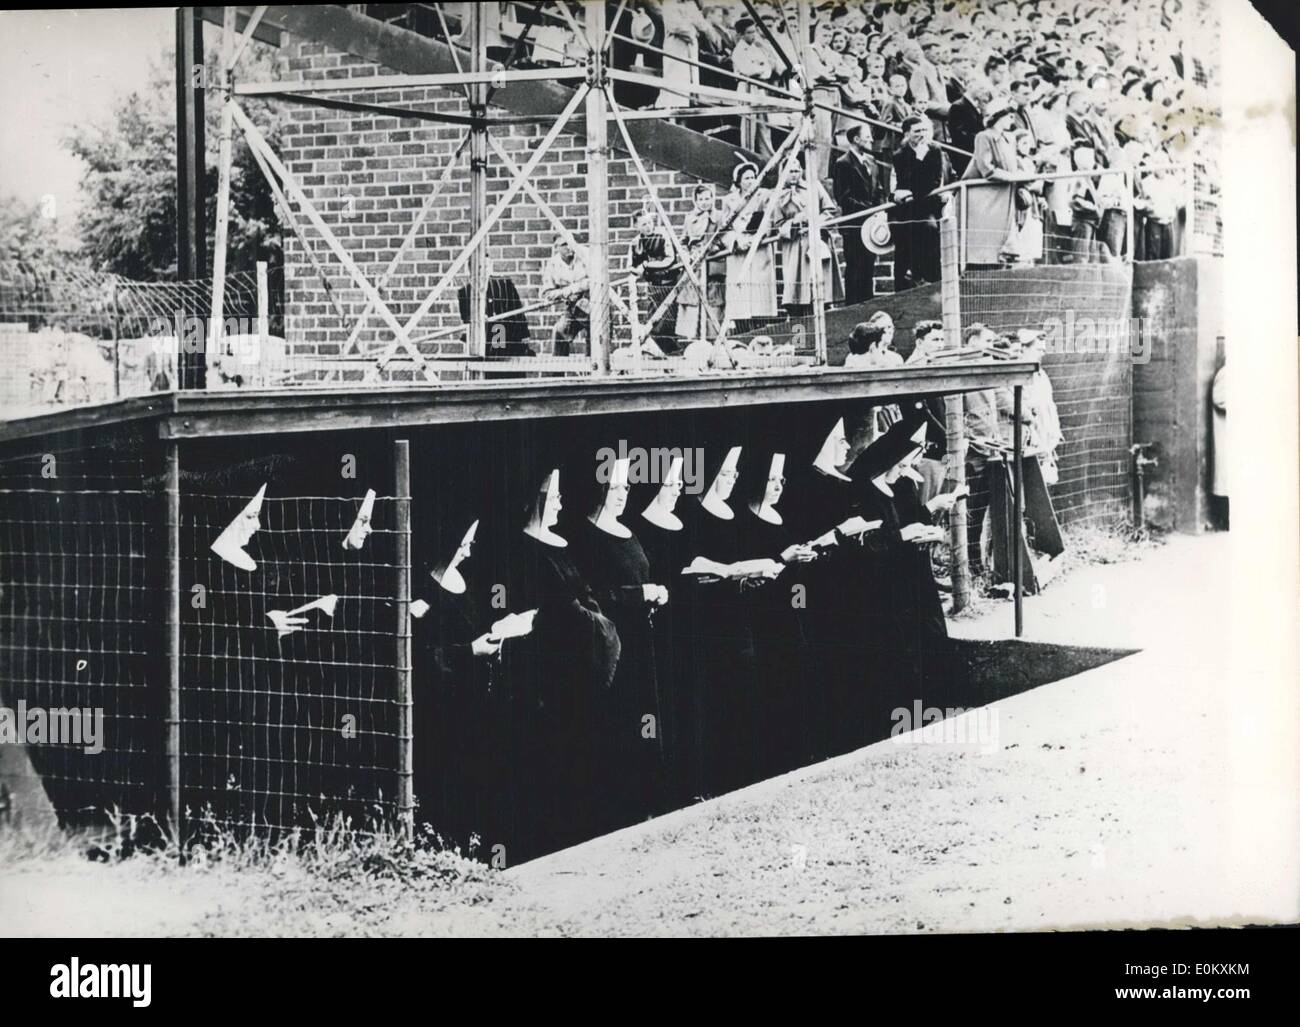 Jul. 02, 1952 - In Cold Spring, Minnesota you can find something that you won't see everyday: nuns in the dugout. These nuns are praying in their section while a raucous game of baseball takes place only a few feet away. Stock Photo